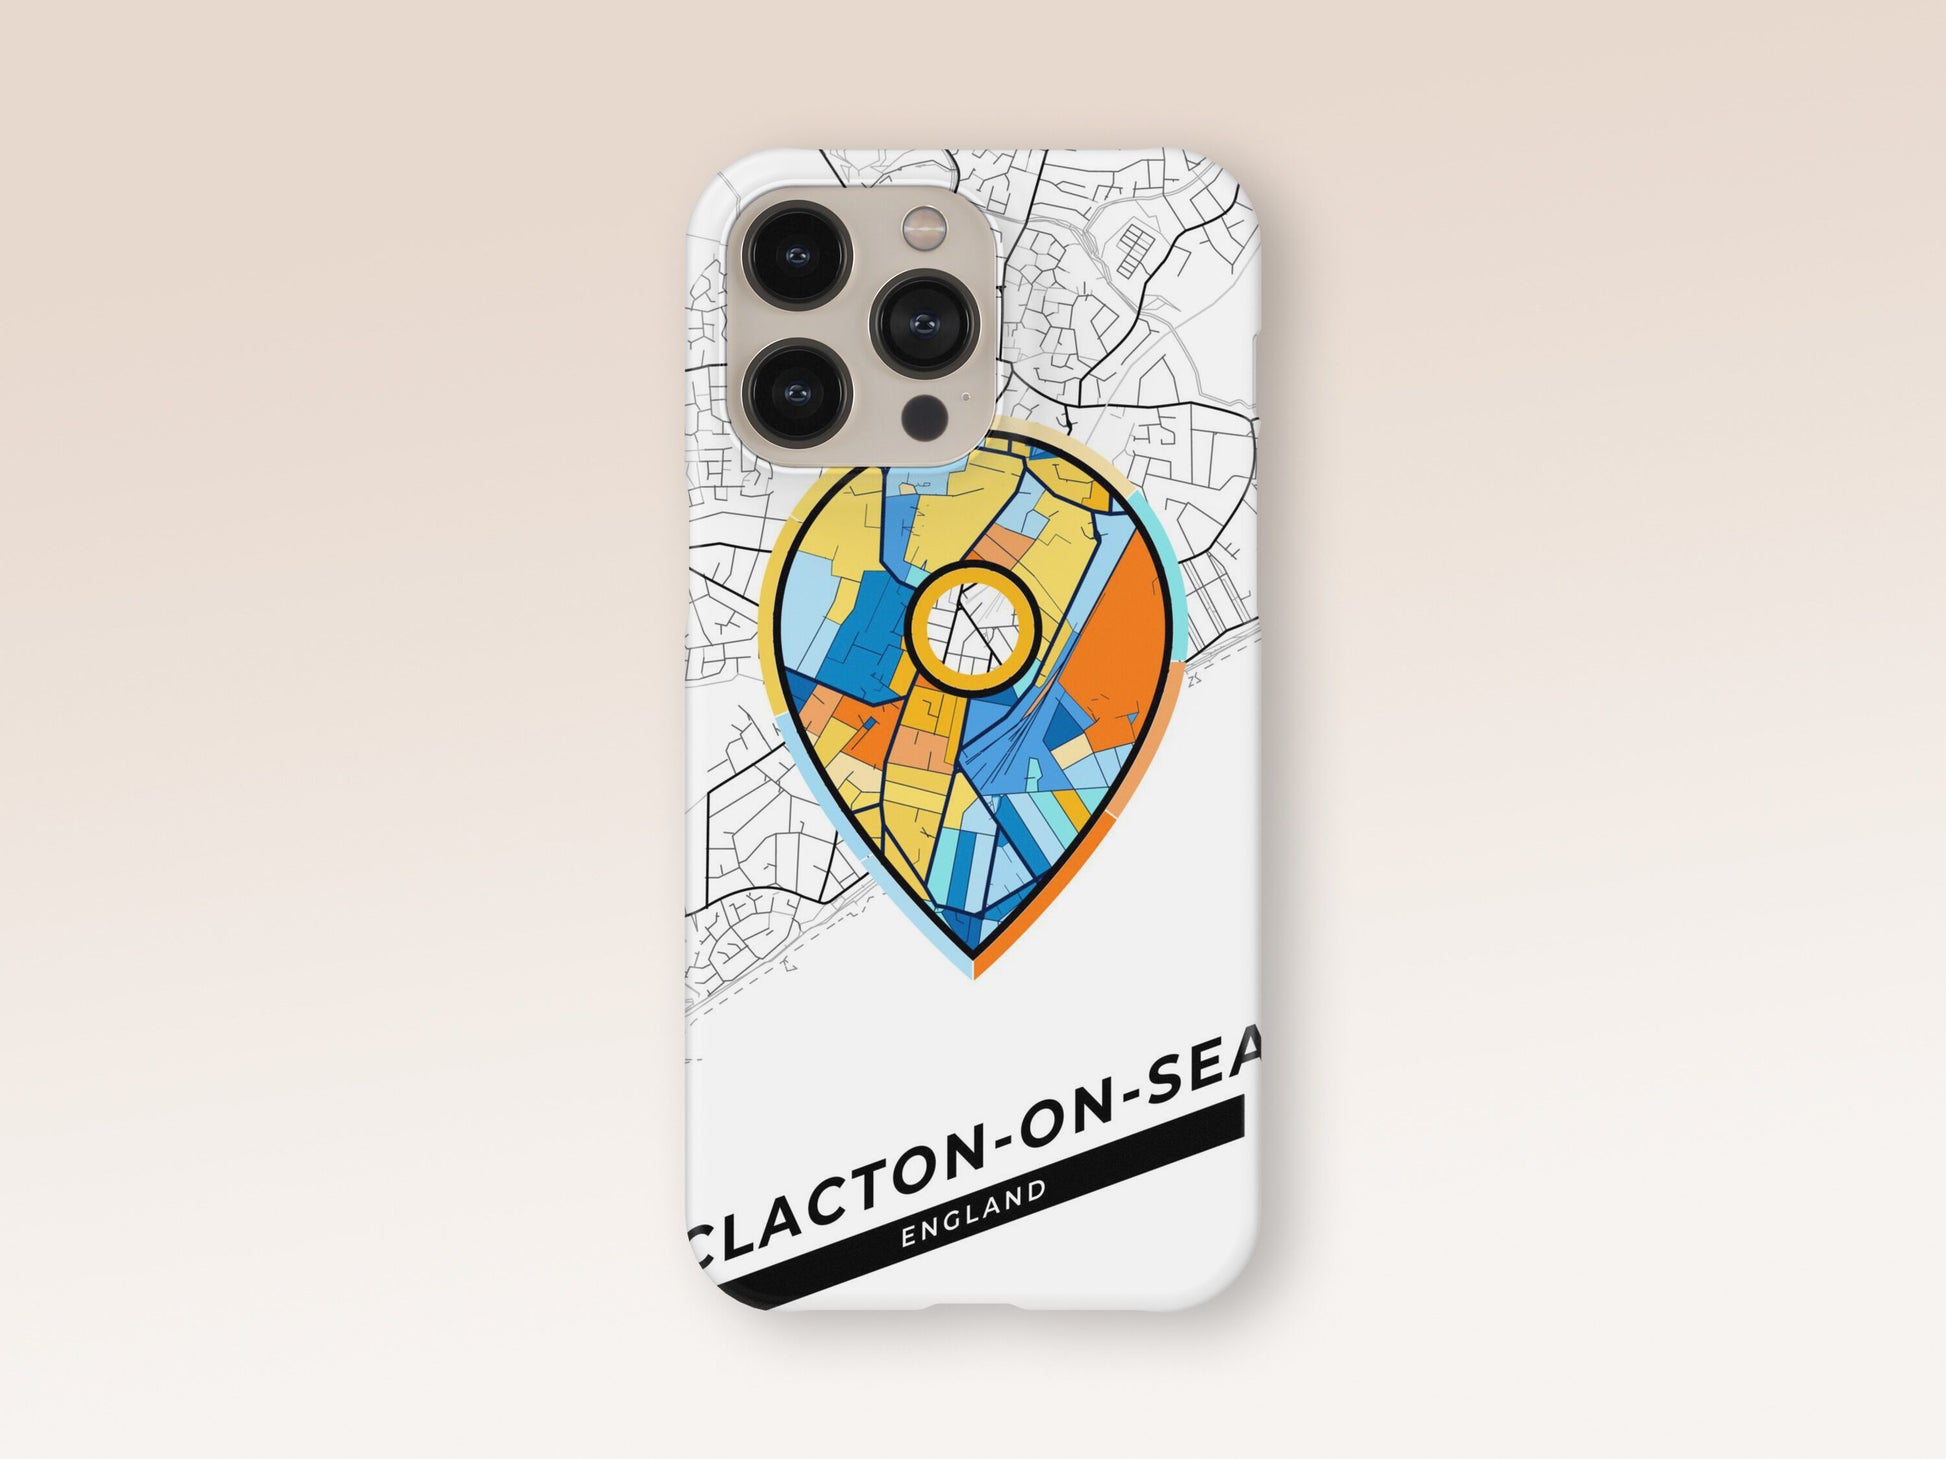 Clacton-On-Sea England slim phone case with colorful icon. Birthday, wedding or housewarming gift. Couple match cases. 1